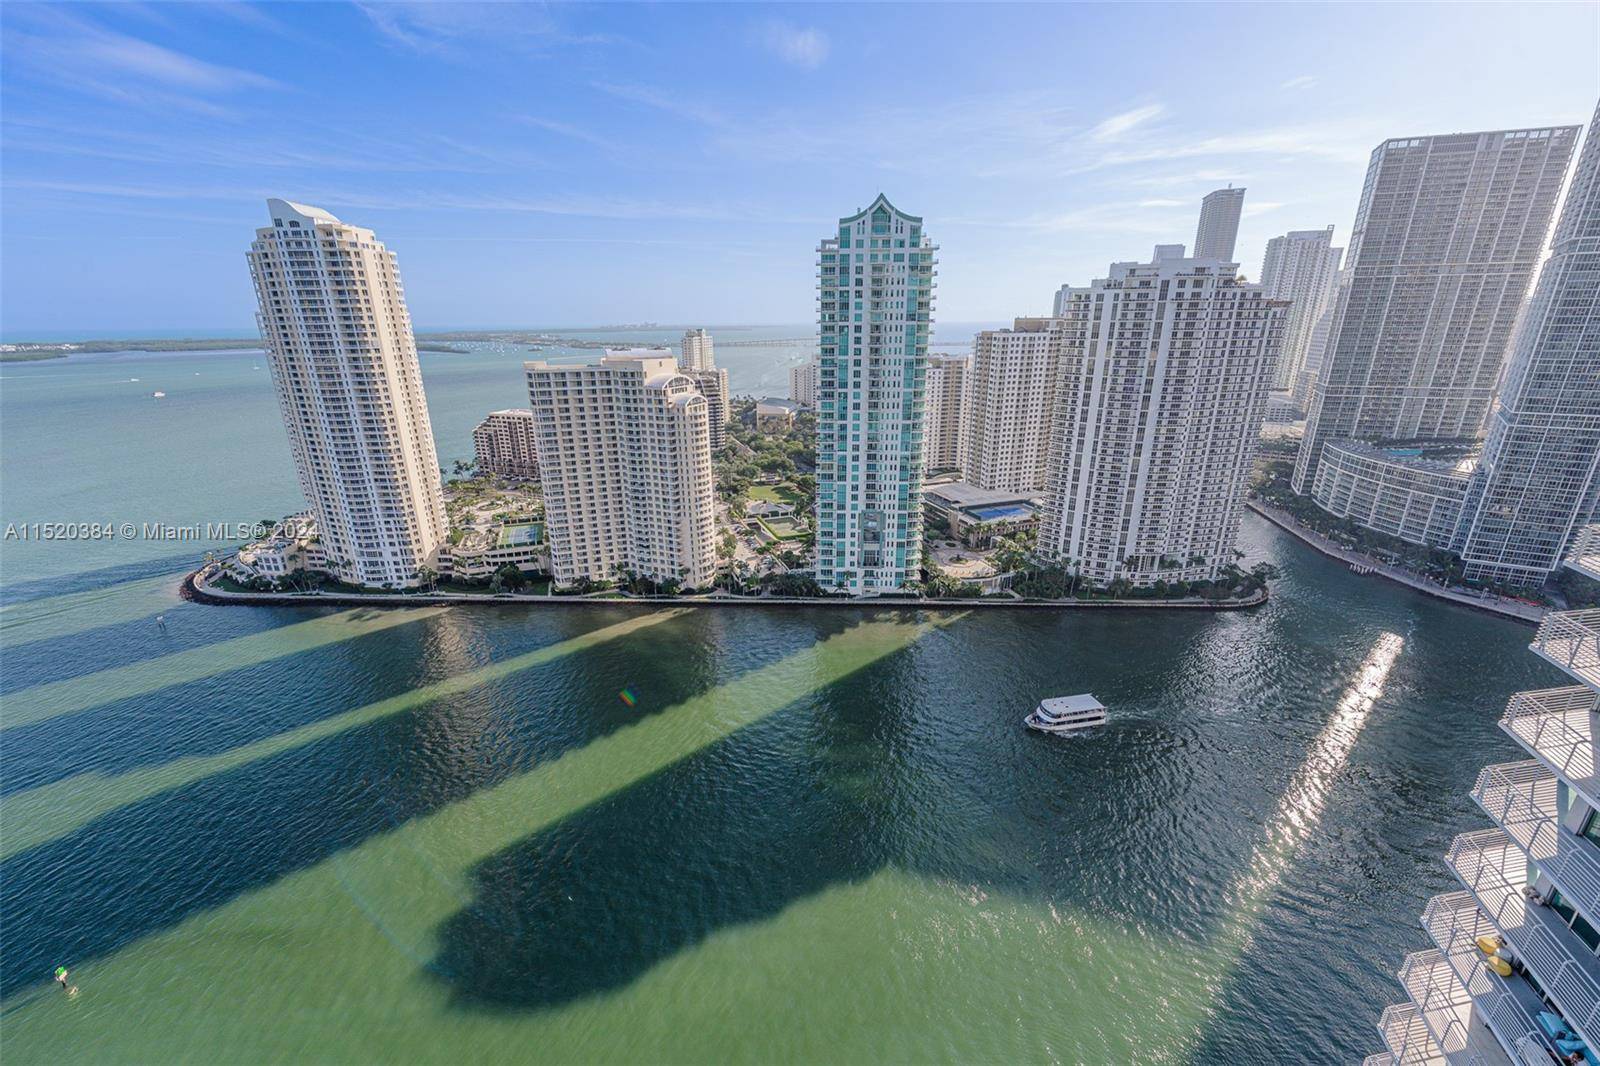 Exquisite 2 bed, 2 bath condo, fully renovated, showcasing breathtaking views of Biscayne Bay and Brickell.